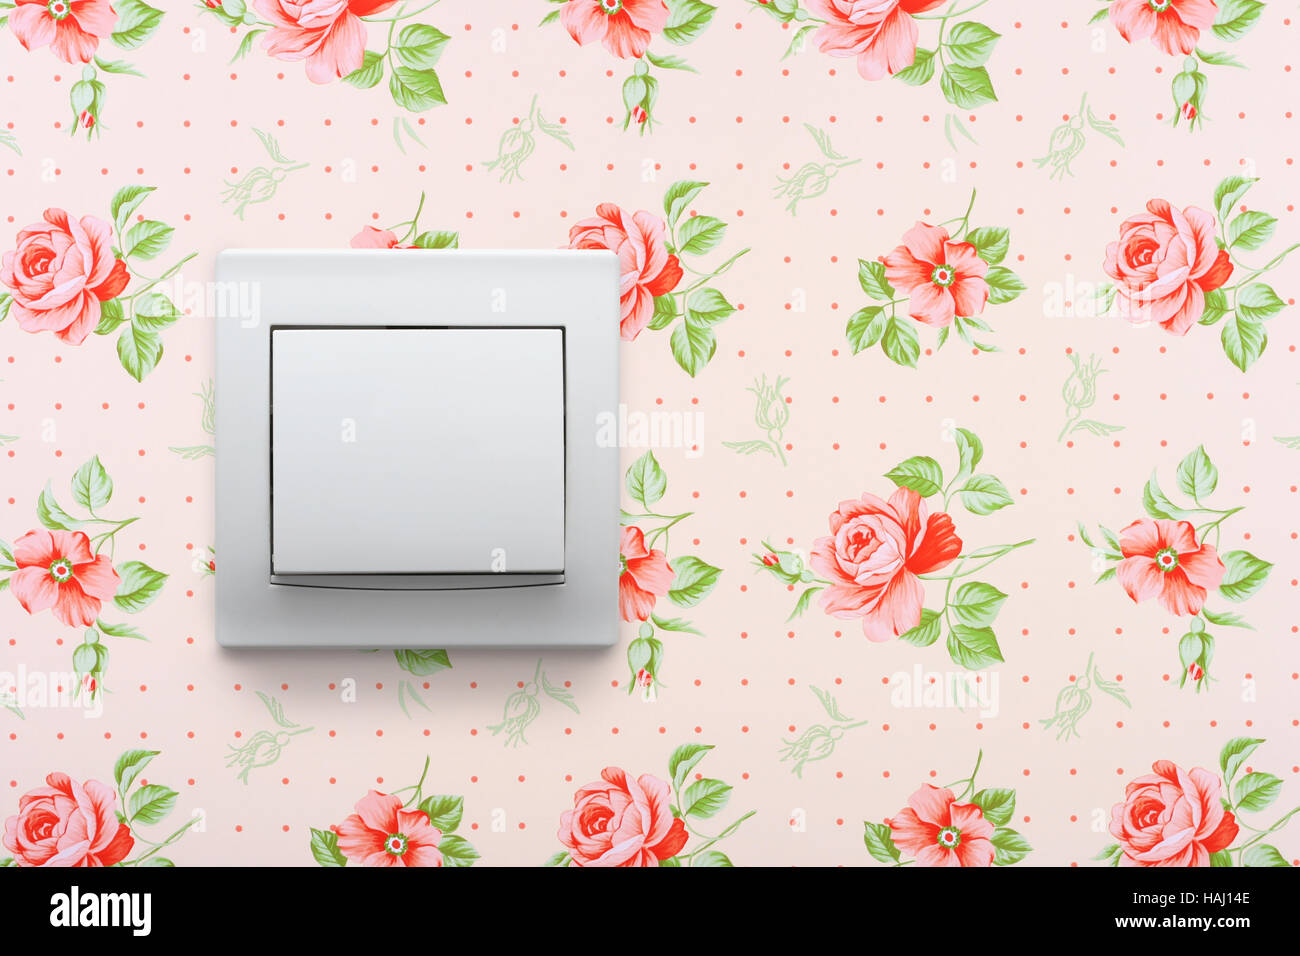 light switch on retro floral wallpaper Stock Photo